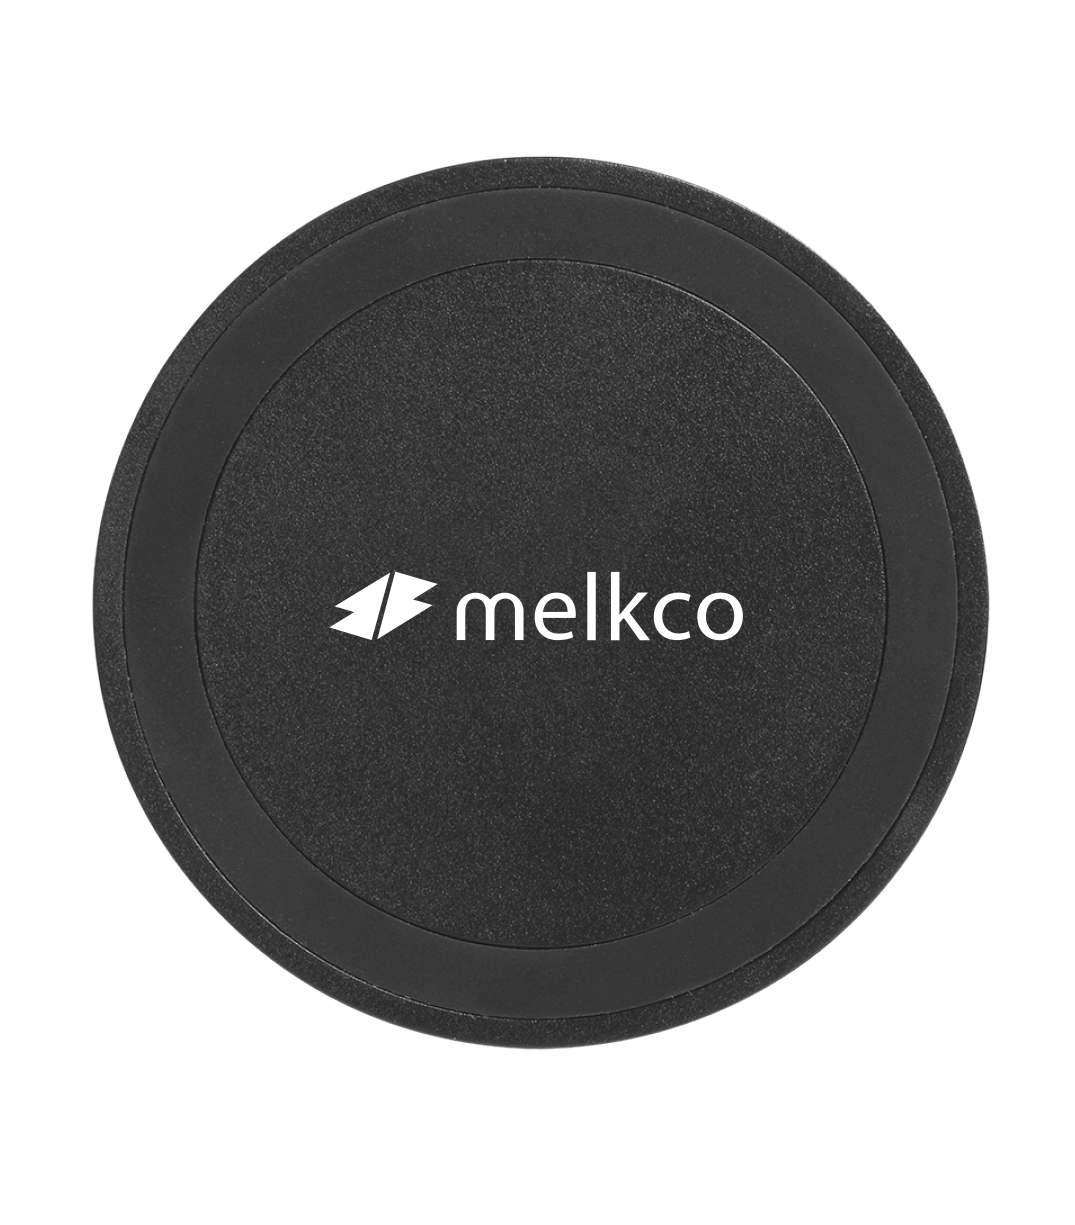 Melkco Fast Wireless Charger Power Cap Wireless Charger - (Black)